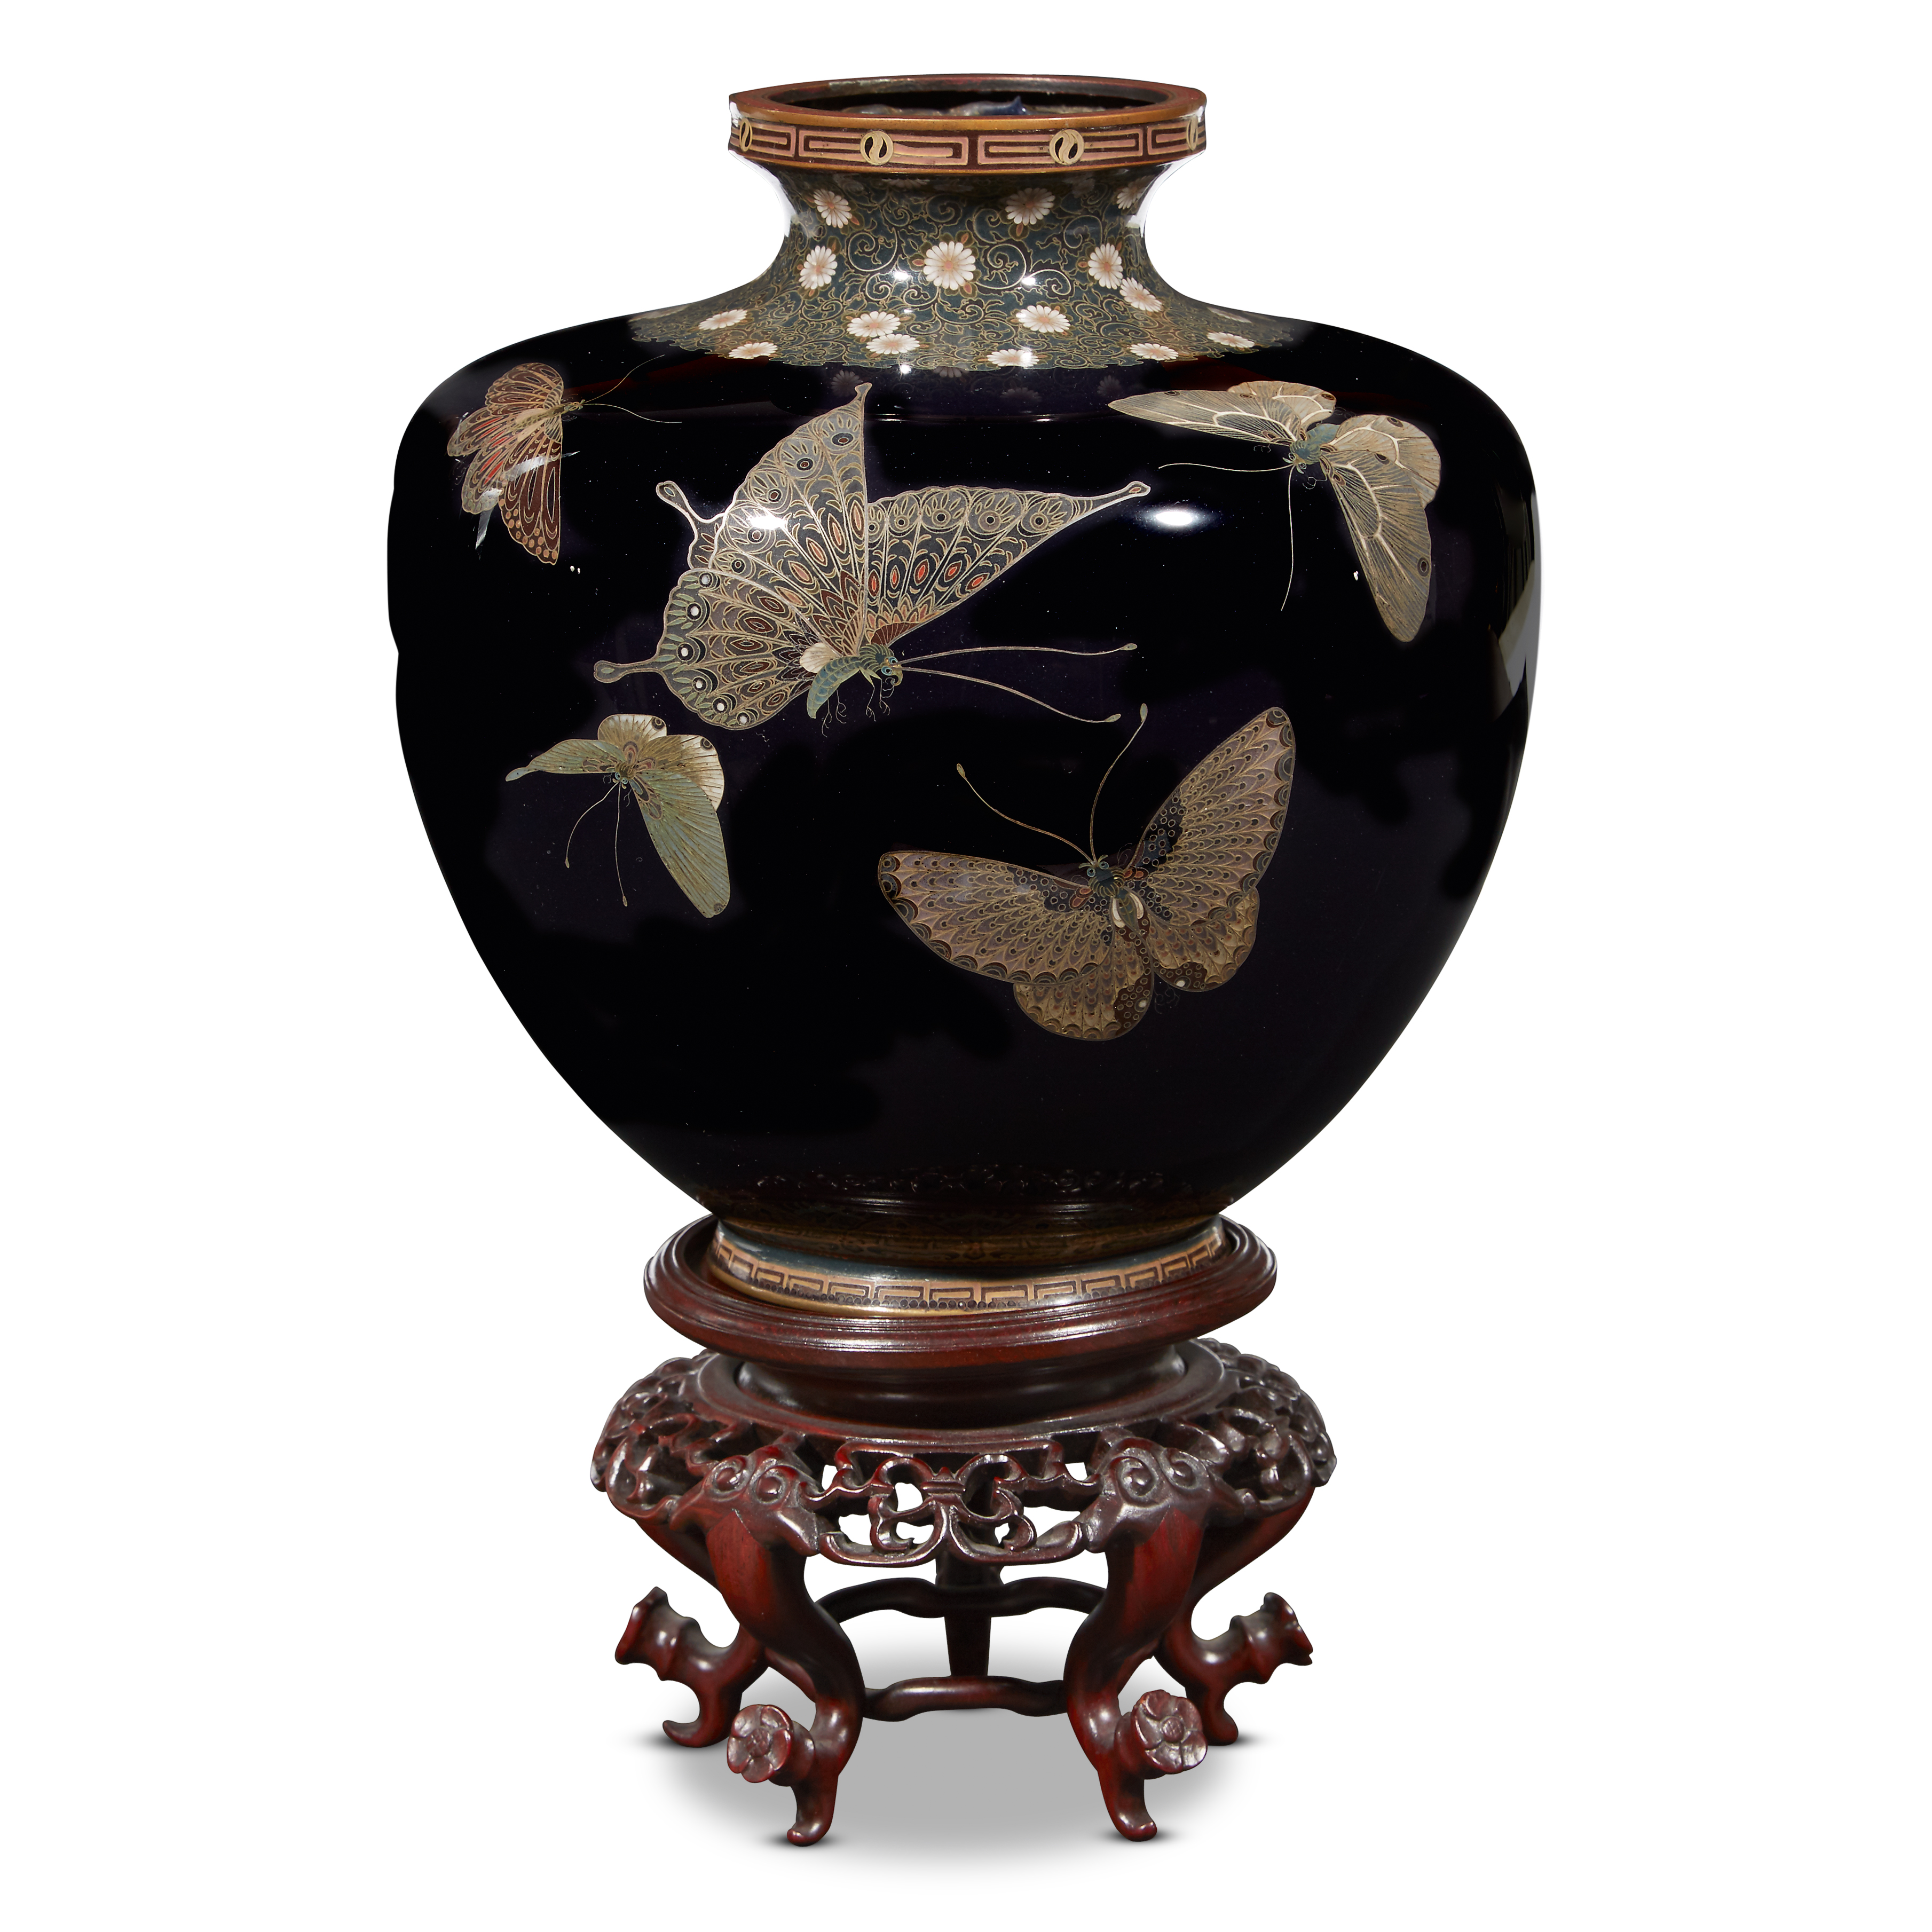 Lot 594: A finely-decorated Japanese cloisonné 